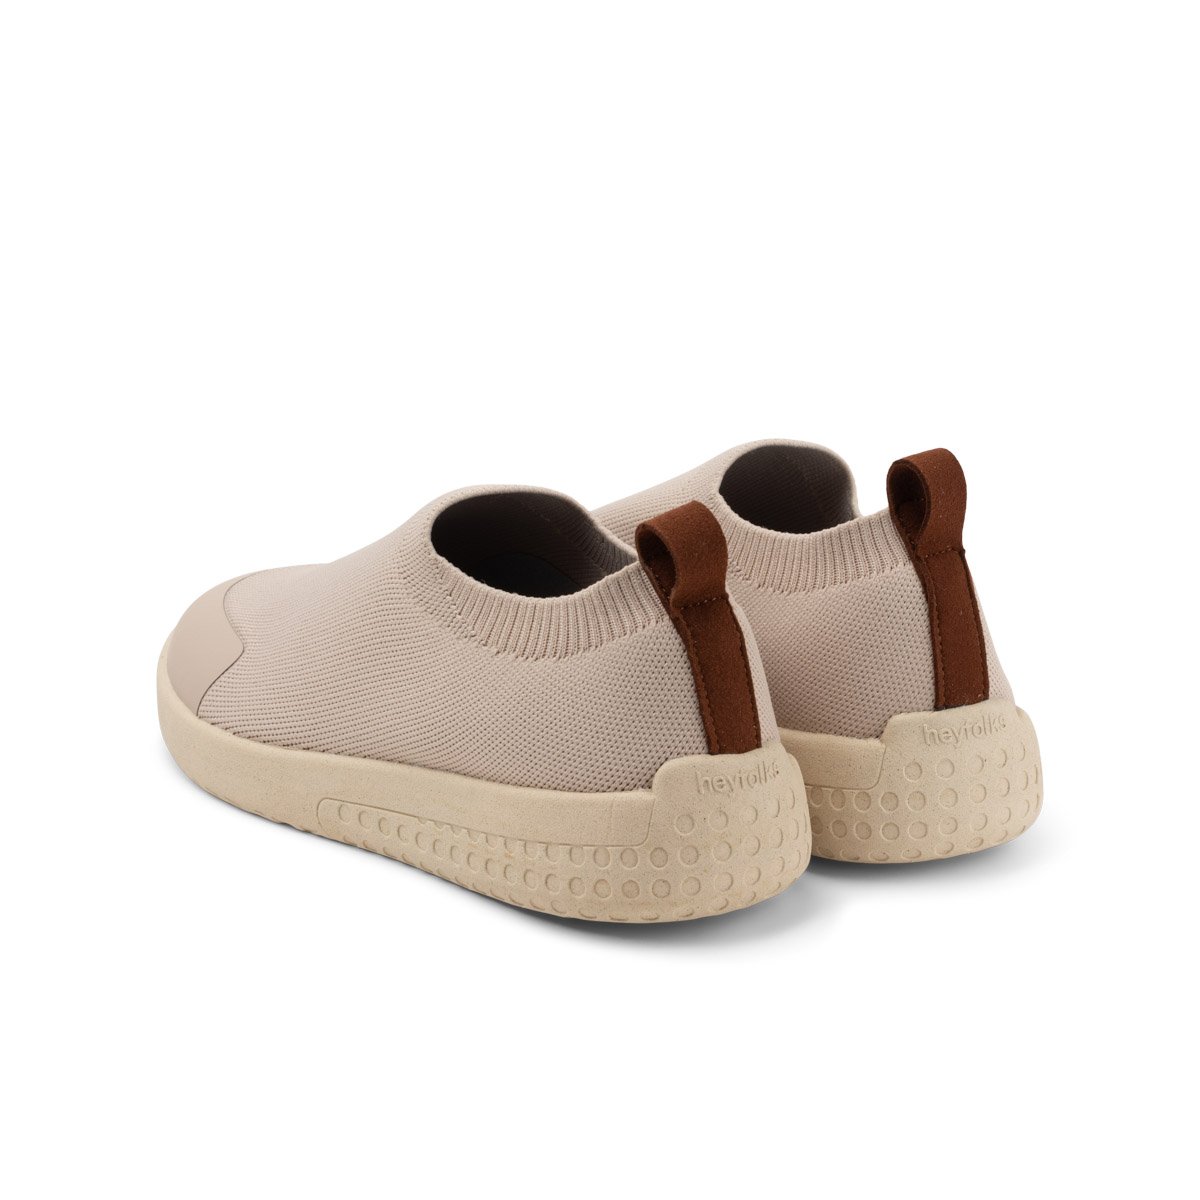 Heyfolks: It's a Good Day! Conscious Comfort Shoes – heyfolks